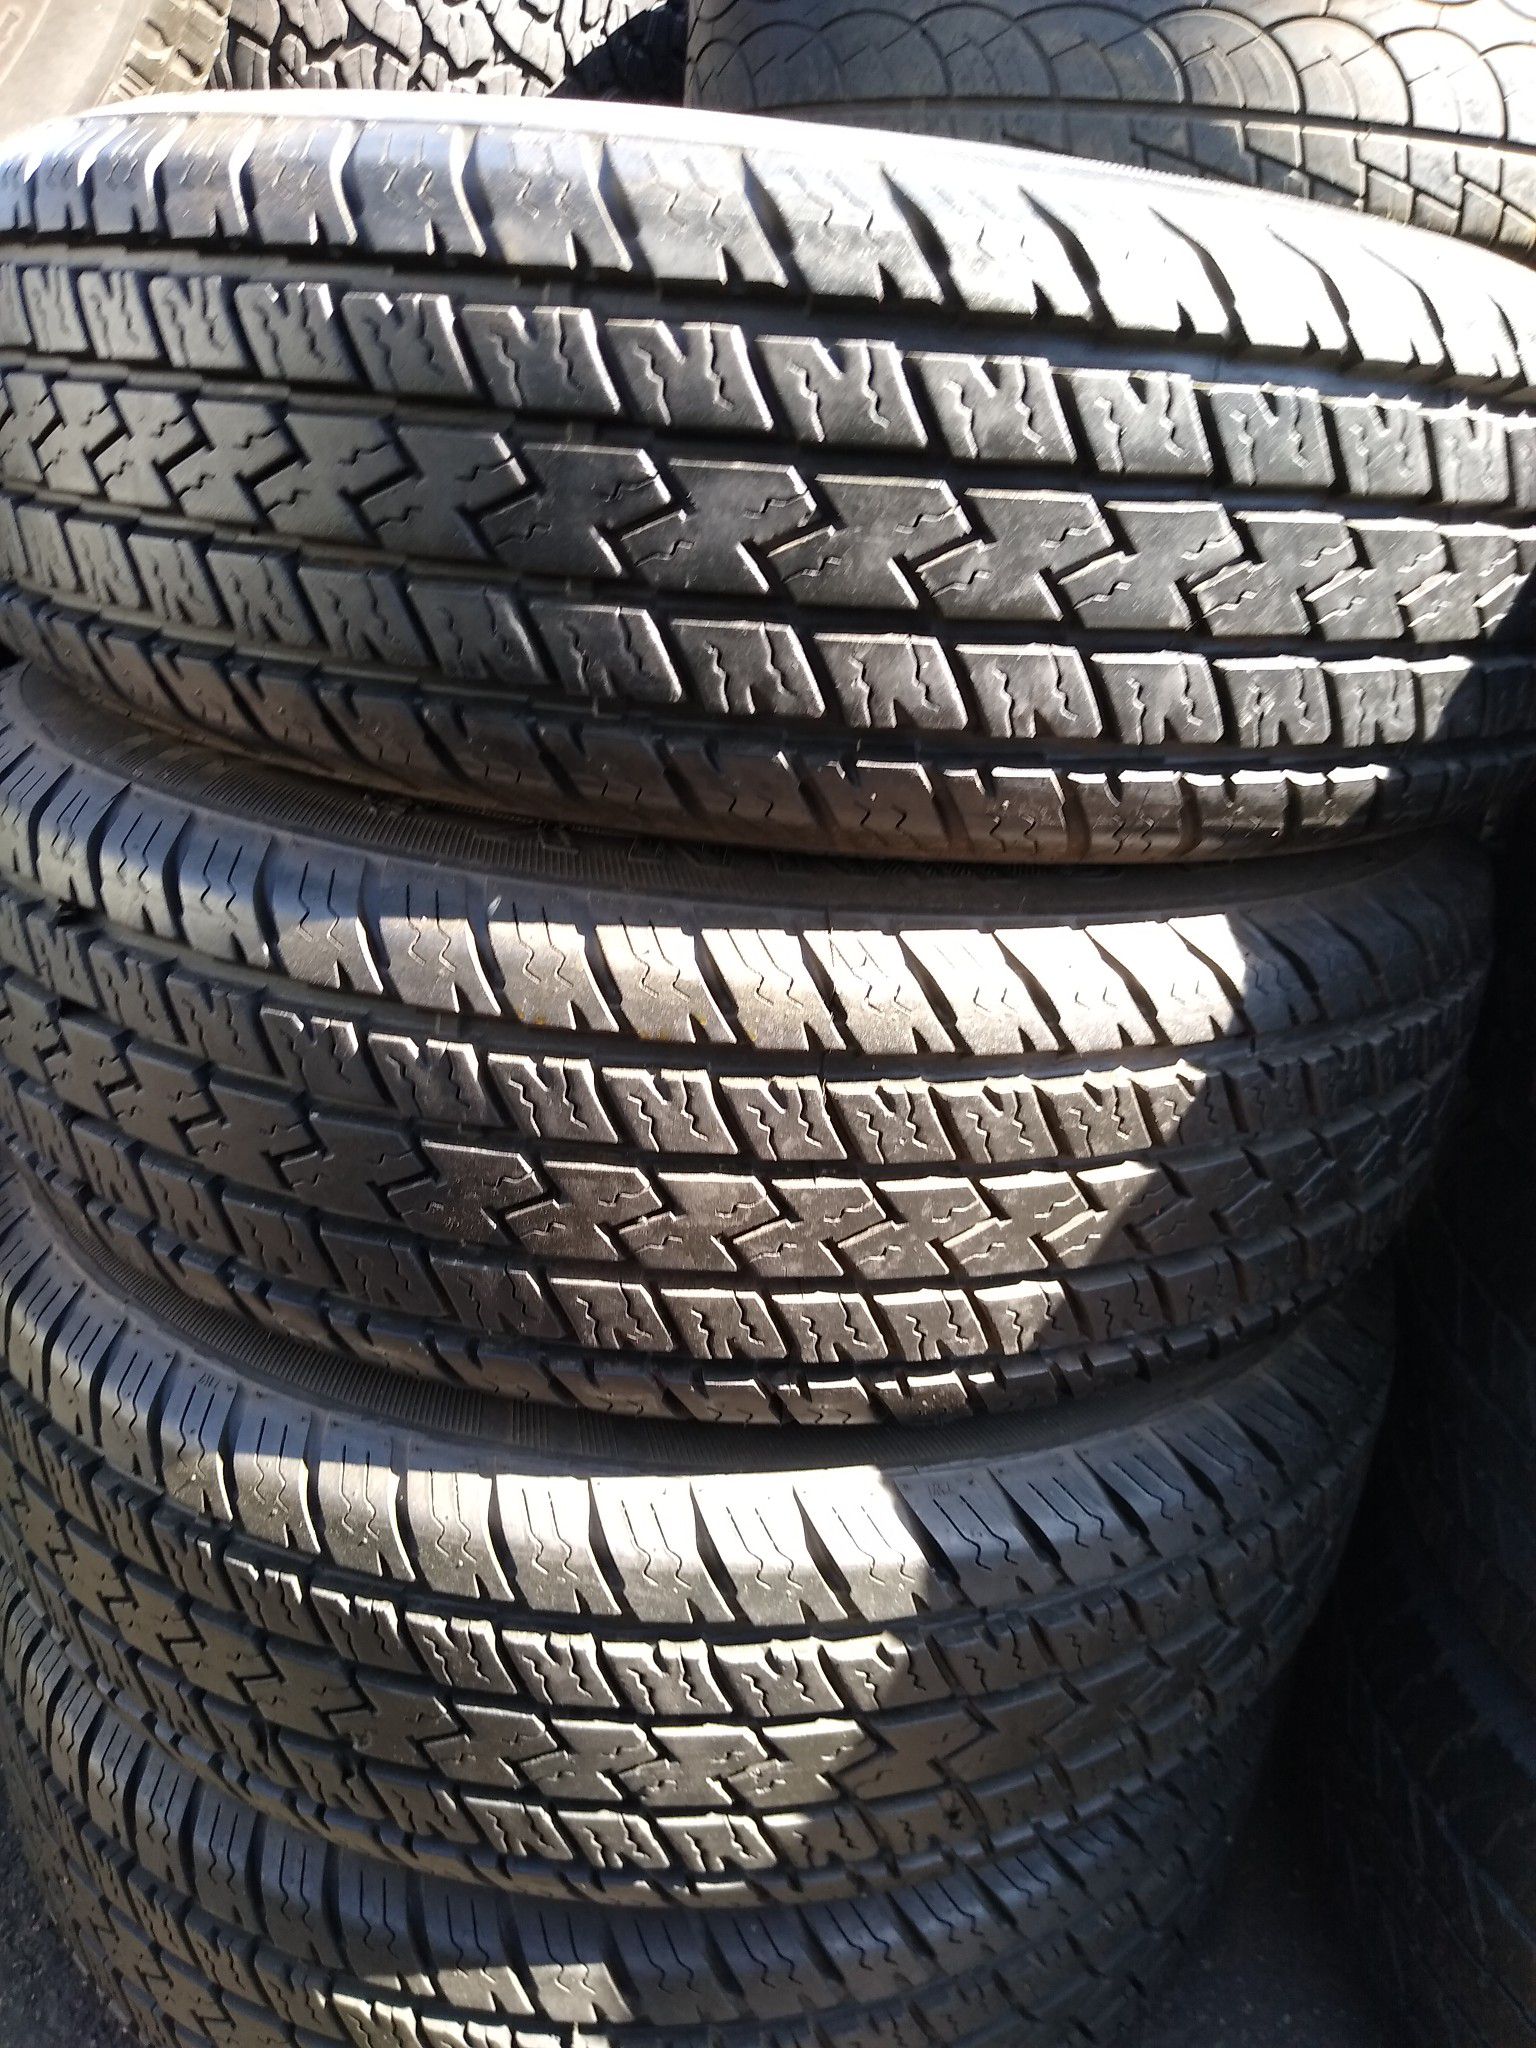 #48- selling 4 used truck tires 245 75 16 all 4 for $70